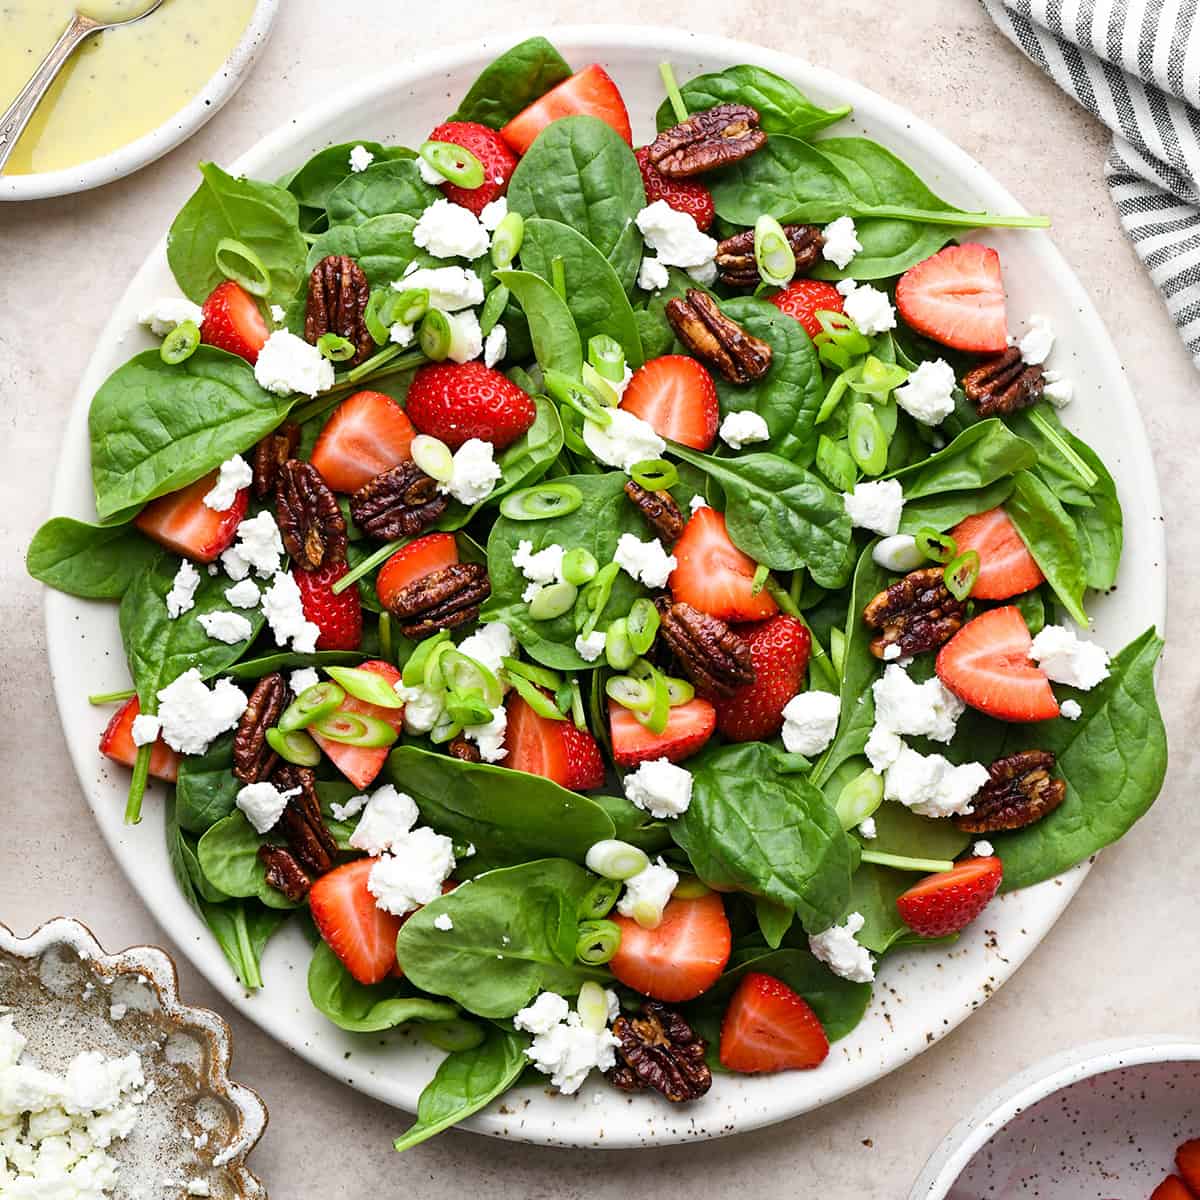 Strawberry Spinach Salad assembled on a plate